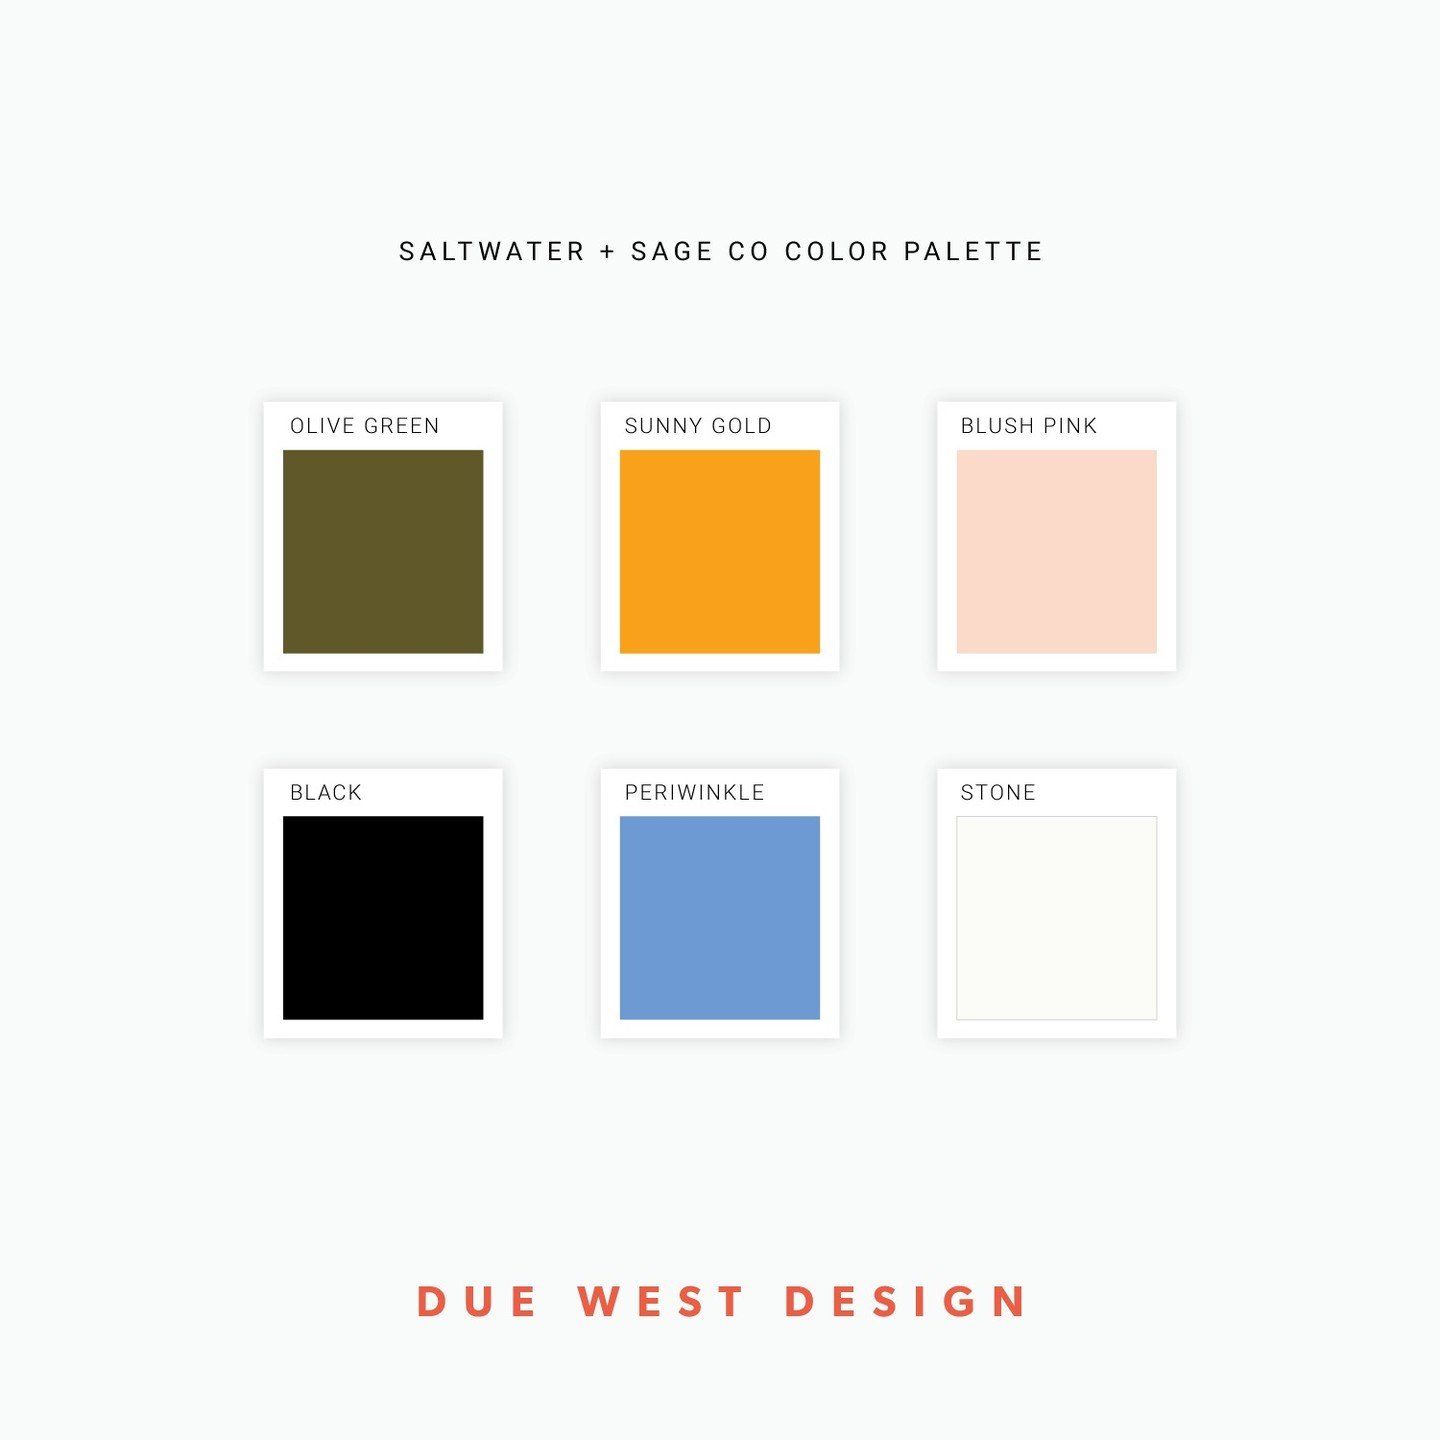 I'm so excited to start off the week by introducing the new color palette (and brand/packaging/web site!) for Saltwater + Sage Co 🎉! Colorado Springs-based earring designer Alex wanted a vibrant, nature-based brand that captured her love of the moun